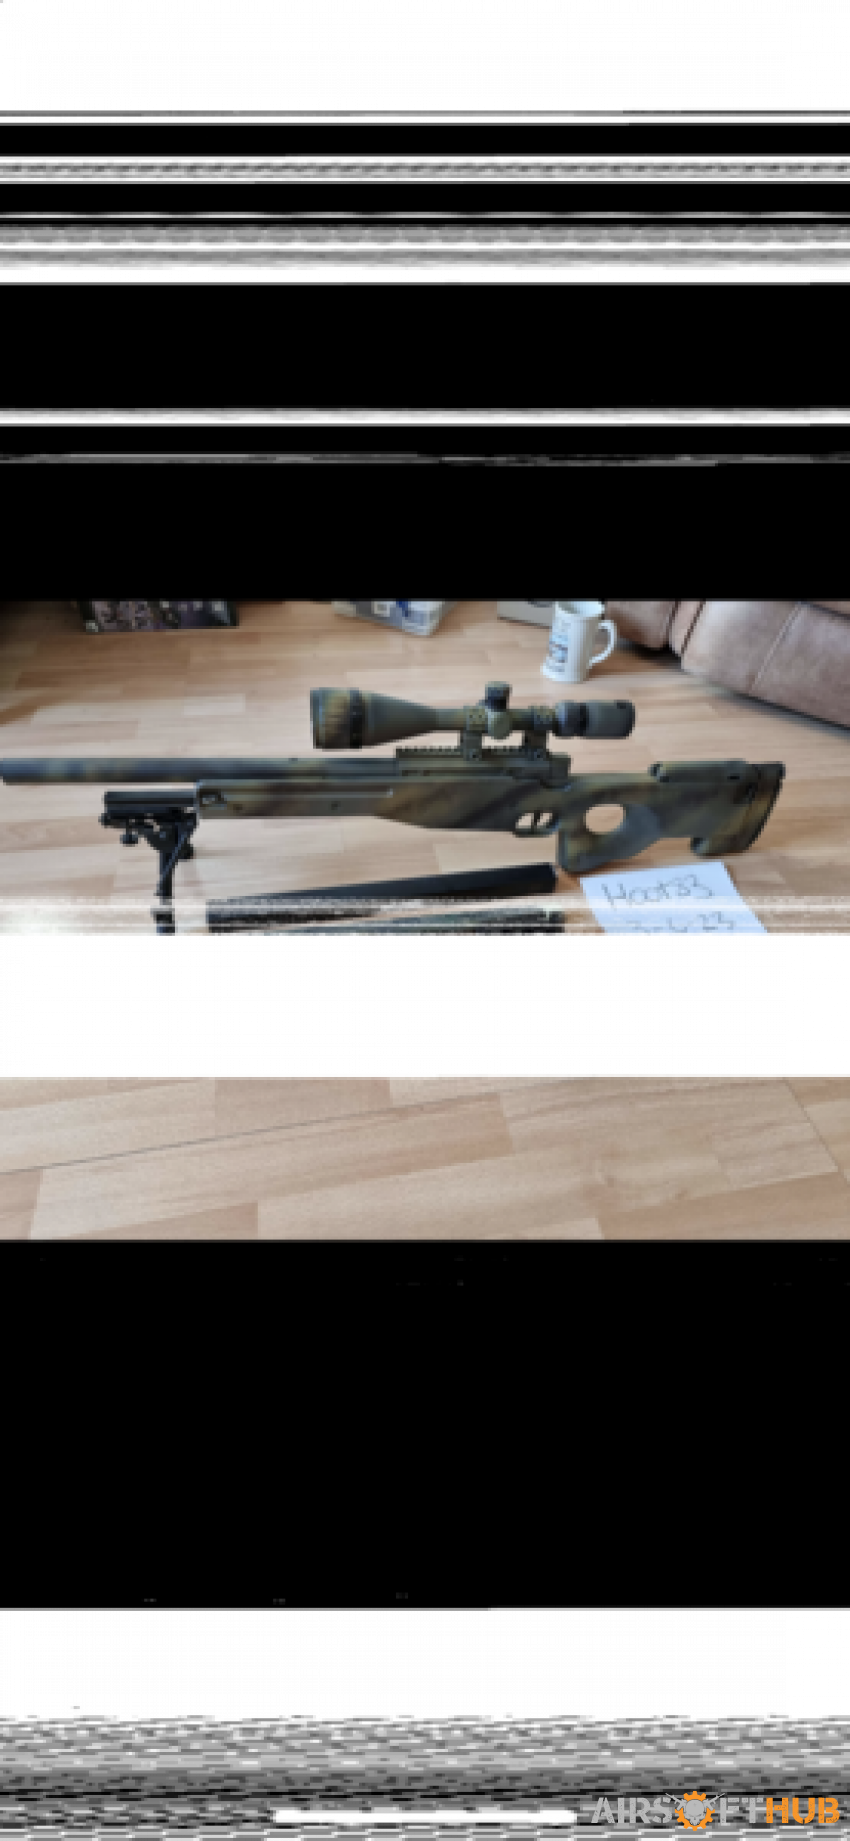 Novritch ssg96 - Used airsoft equipment